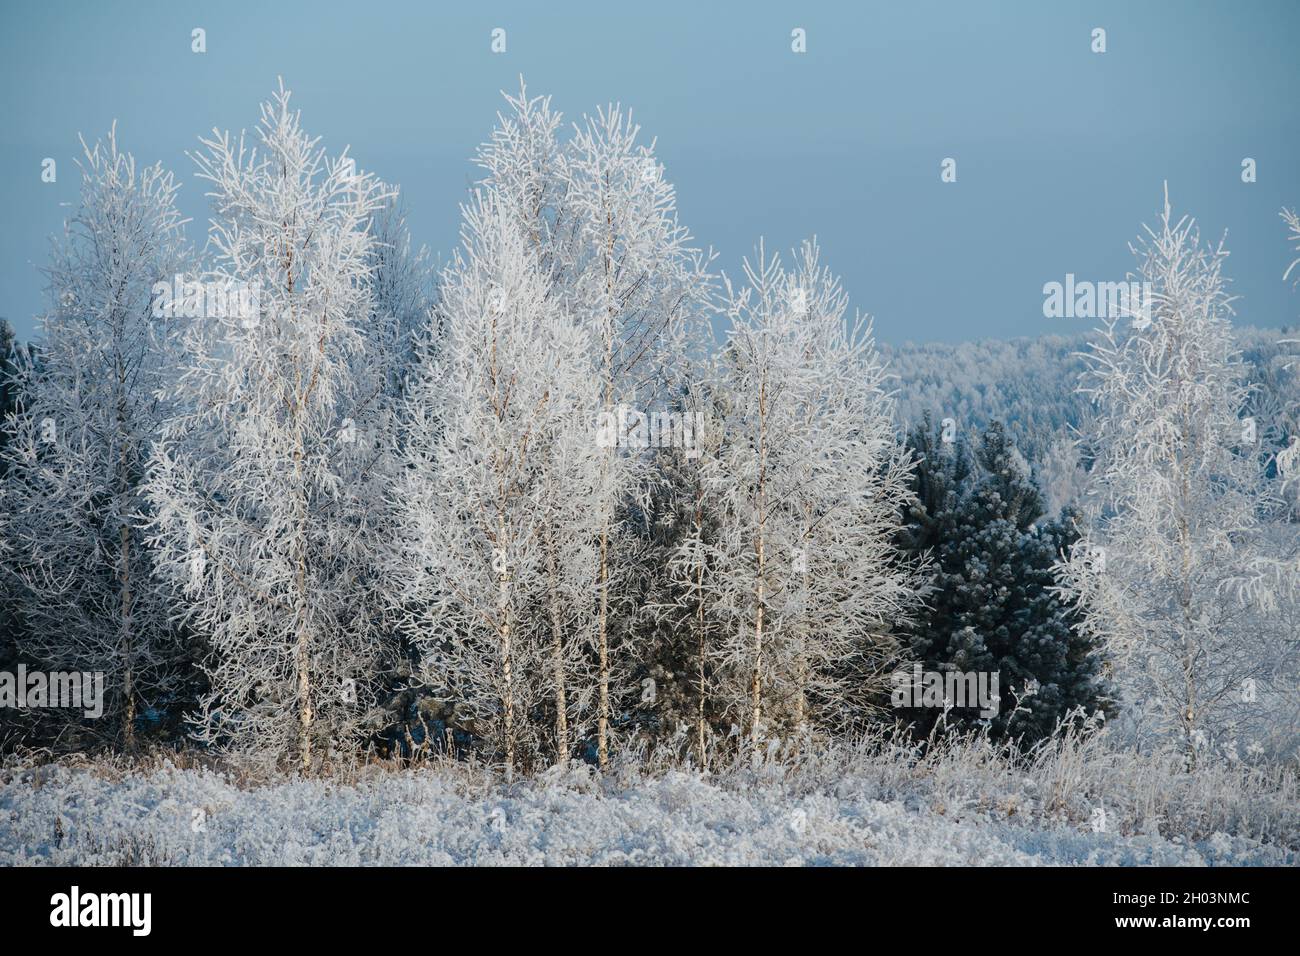 Icy trees at winter. Air moisture condensed on branches because of the cold. Stock Photo